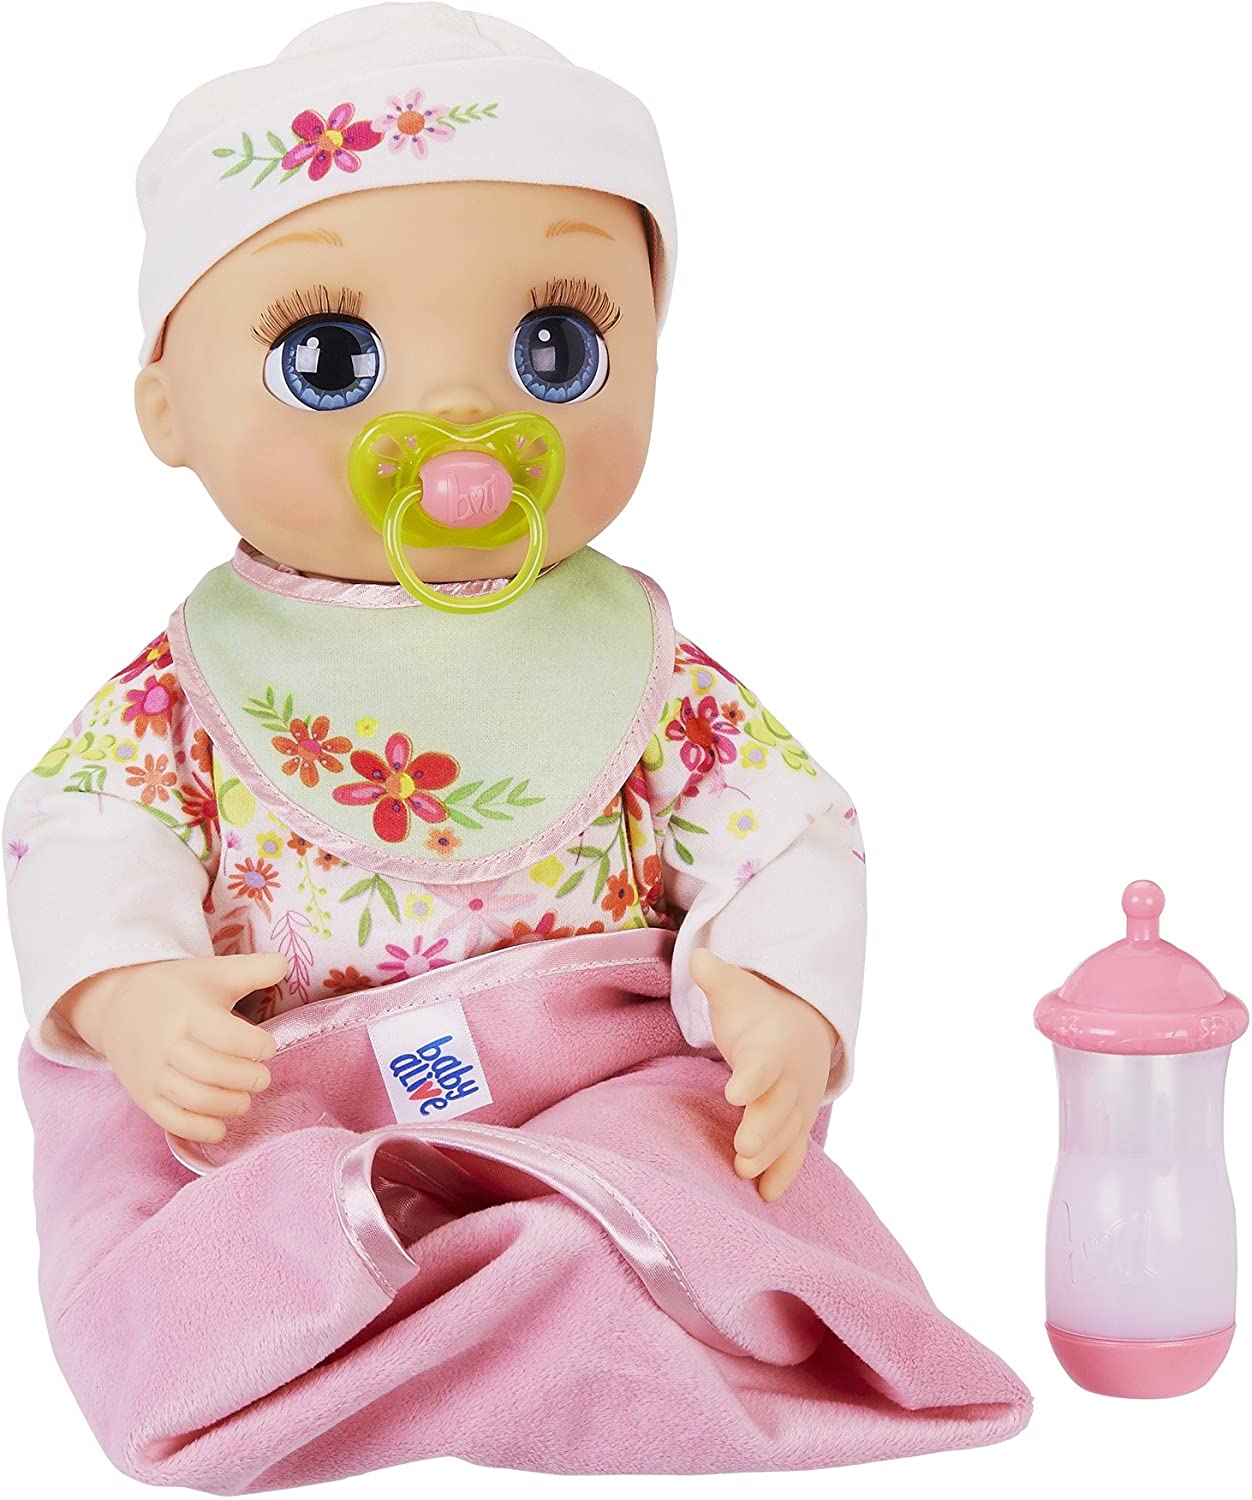 Baby Alive Doll Cyber Monday Sales! Get up to 30 Off!